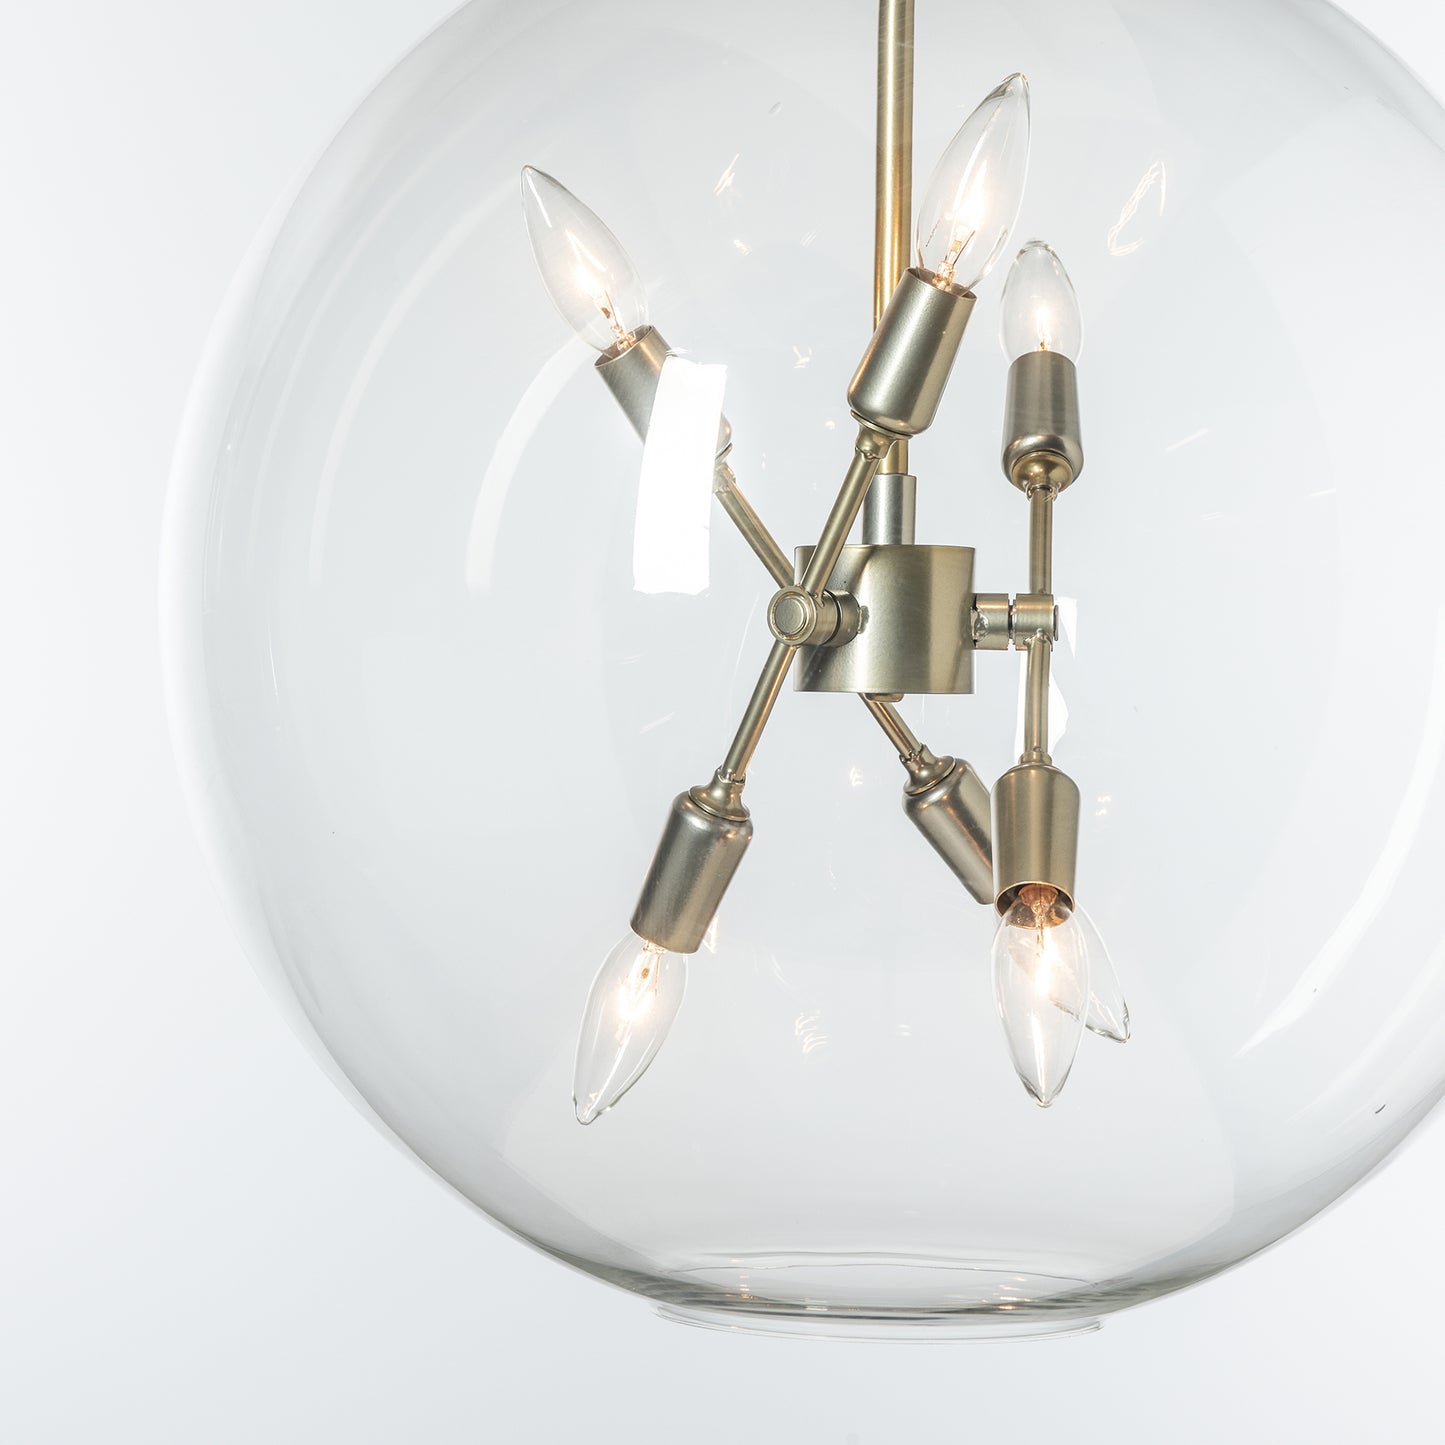 The Hubbardton Forge Sfera 6-Light Pendant is a clear glass ball light fixture with four lights in it.